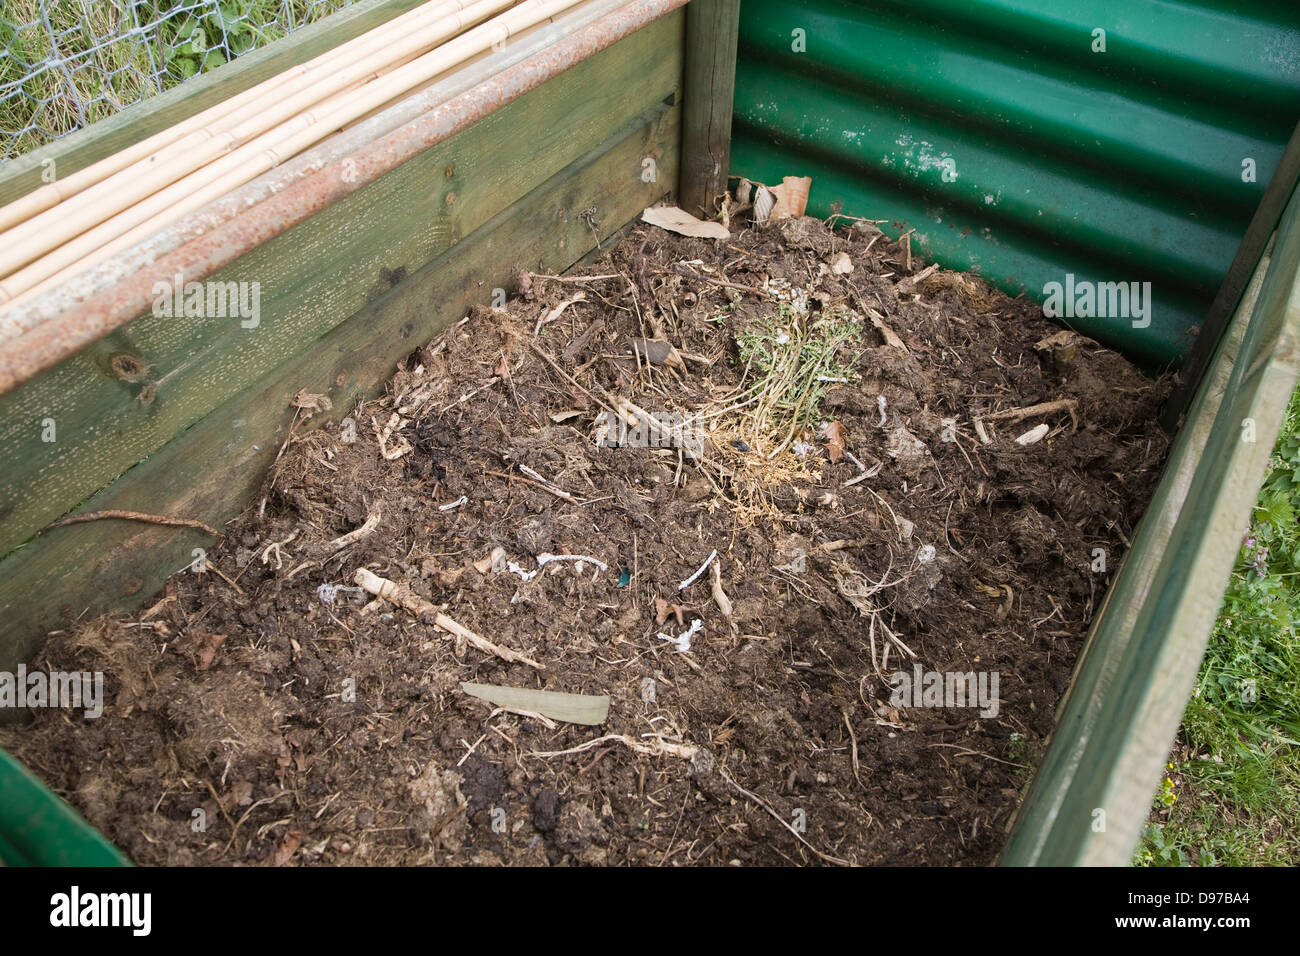 Rotted compost in garden composting bin Stock Photo